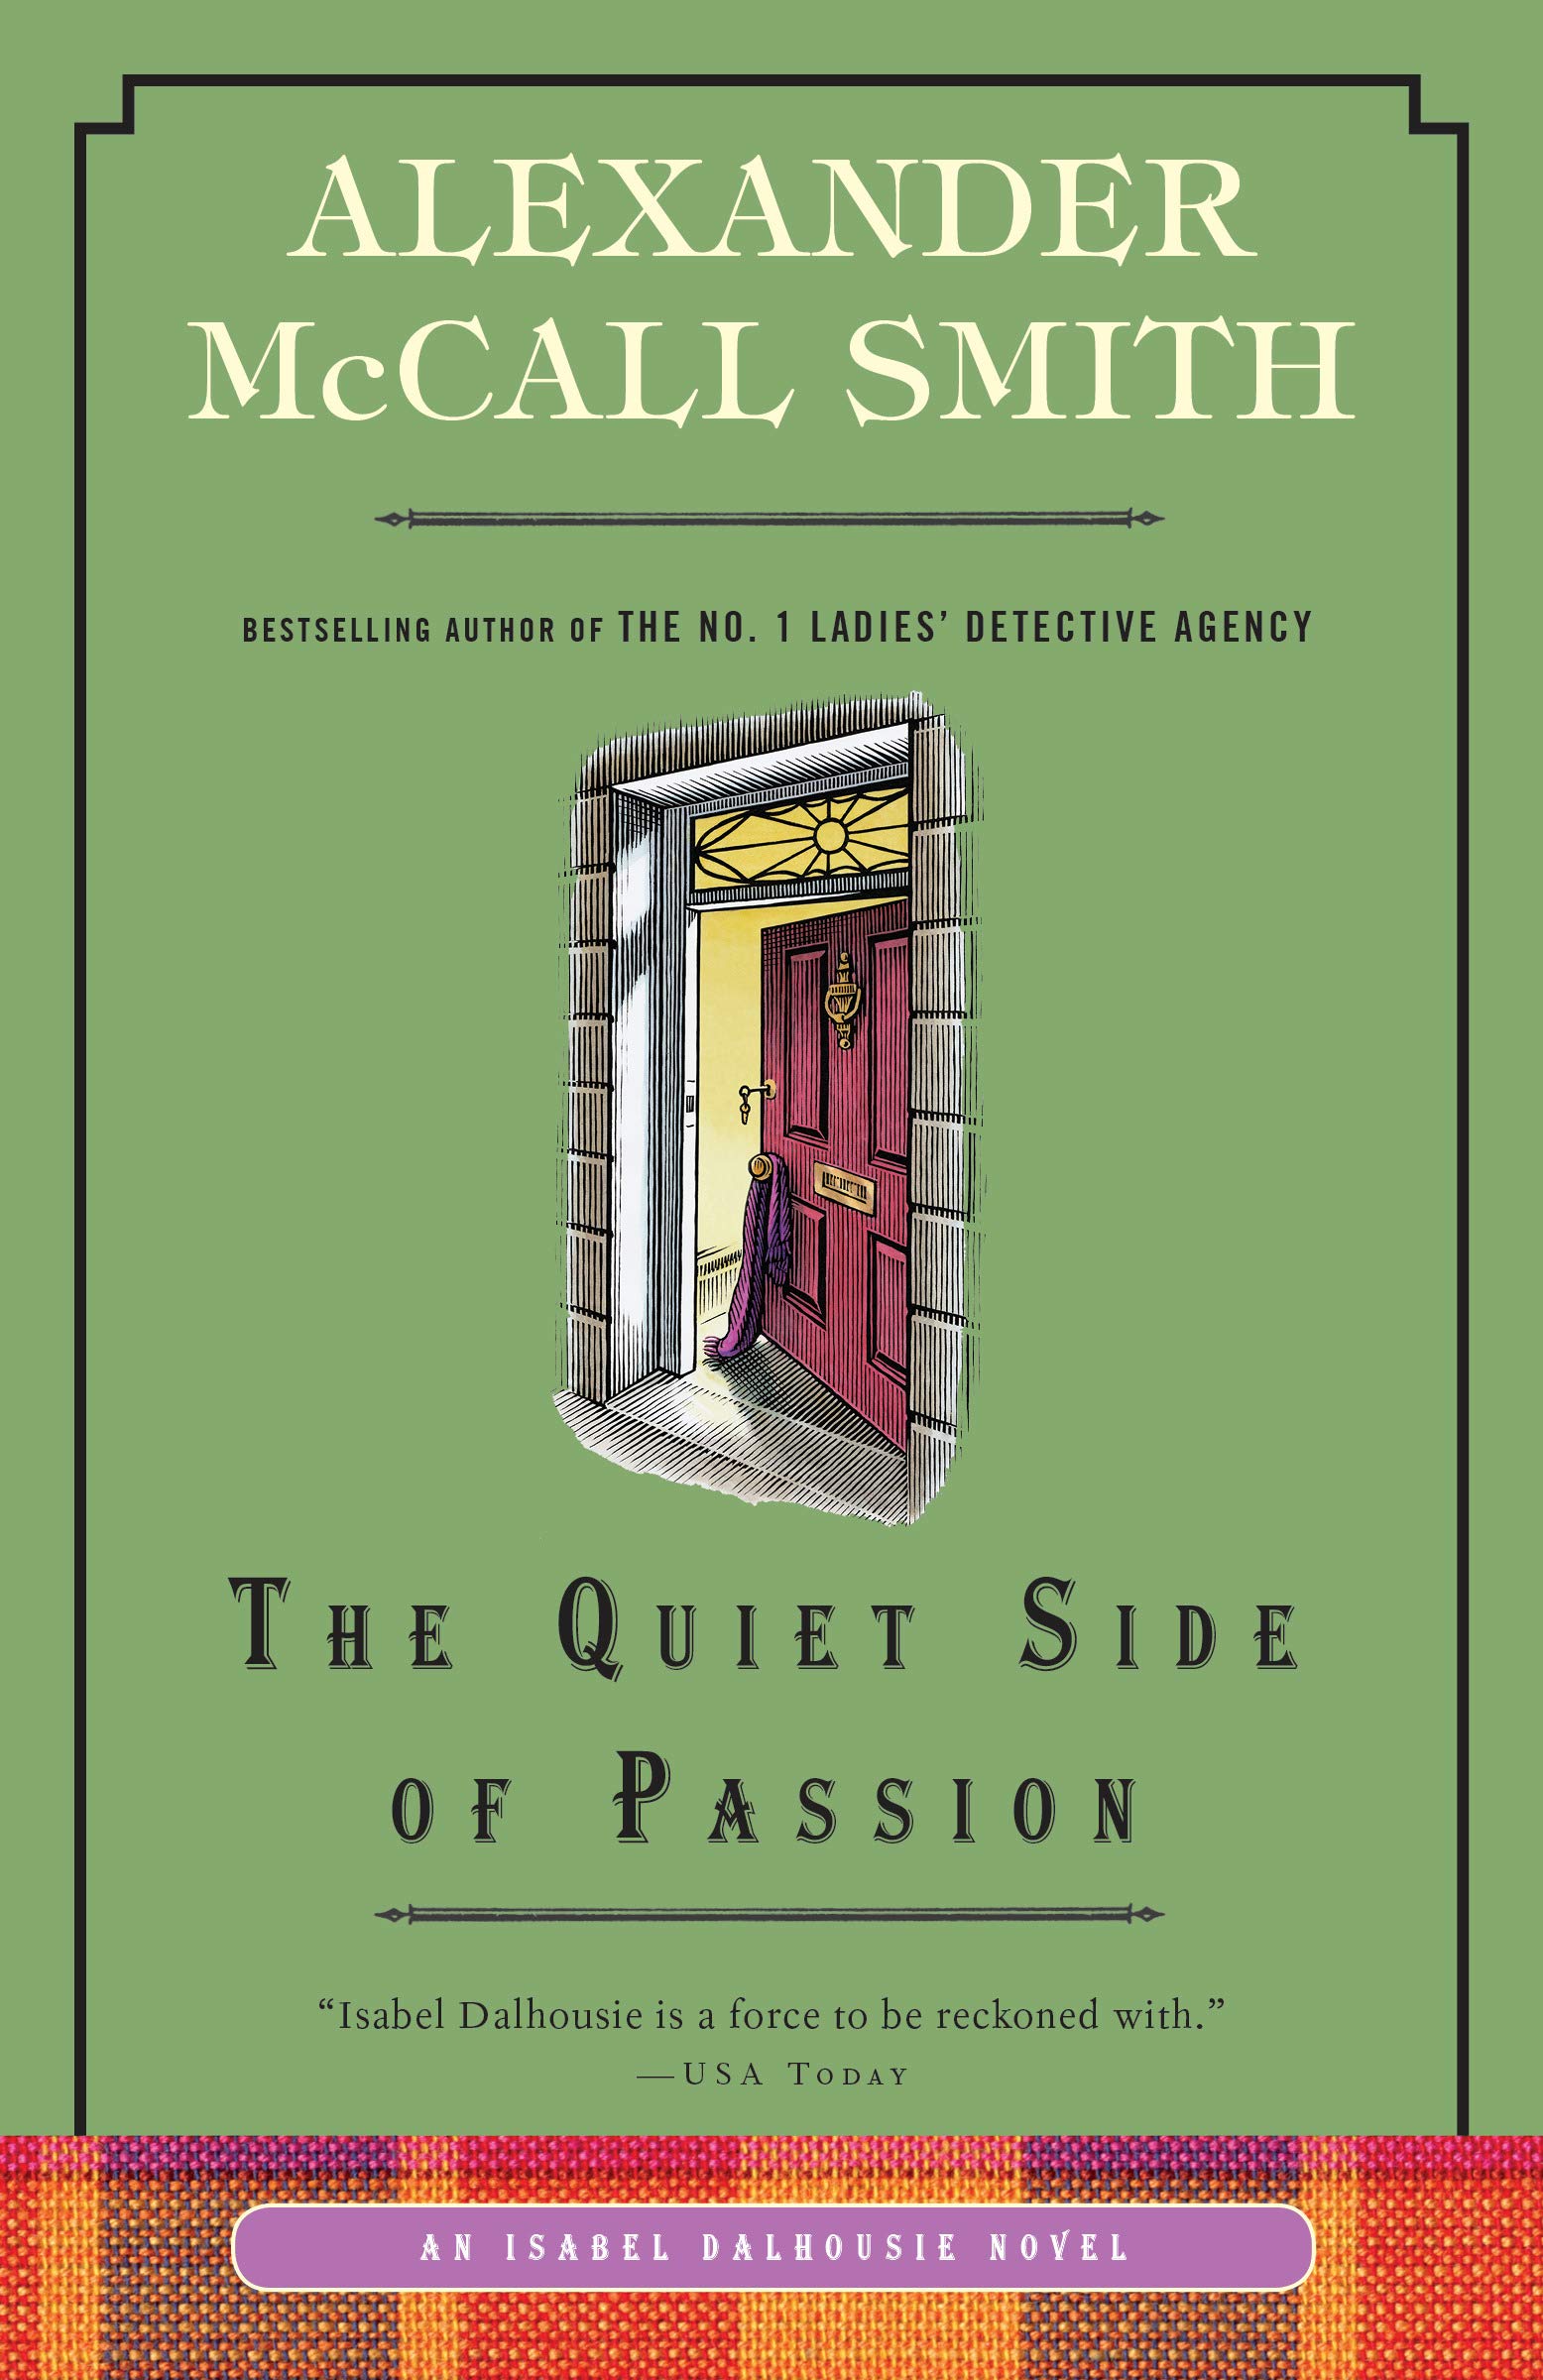 The Quiet Side of Passion: An Isabel Dalhousie Novel (12) (Isabel Dalhousie Series)